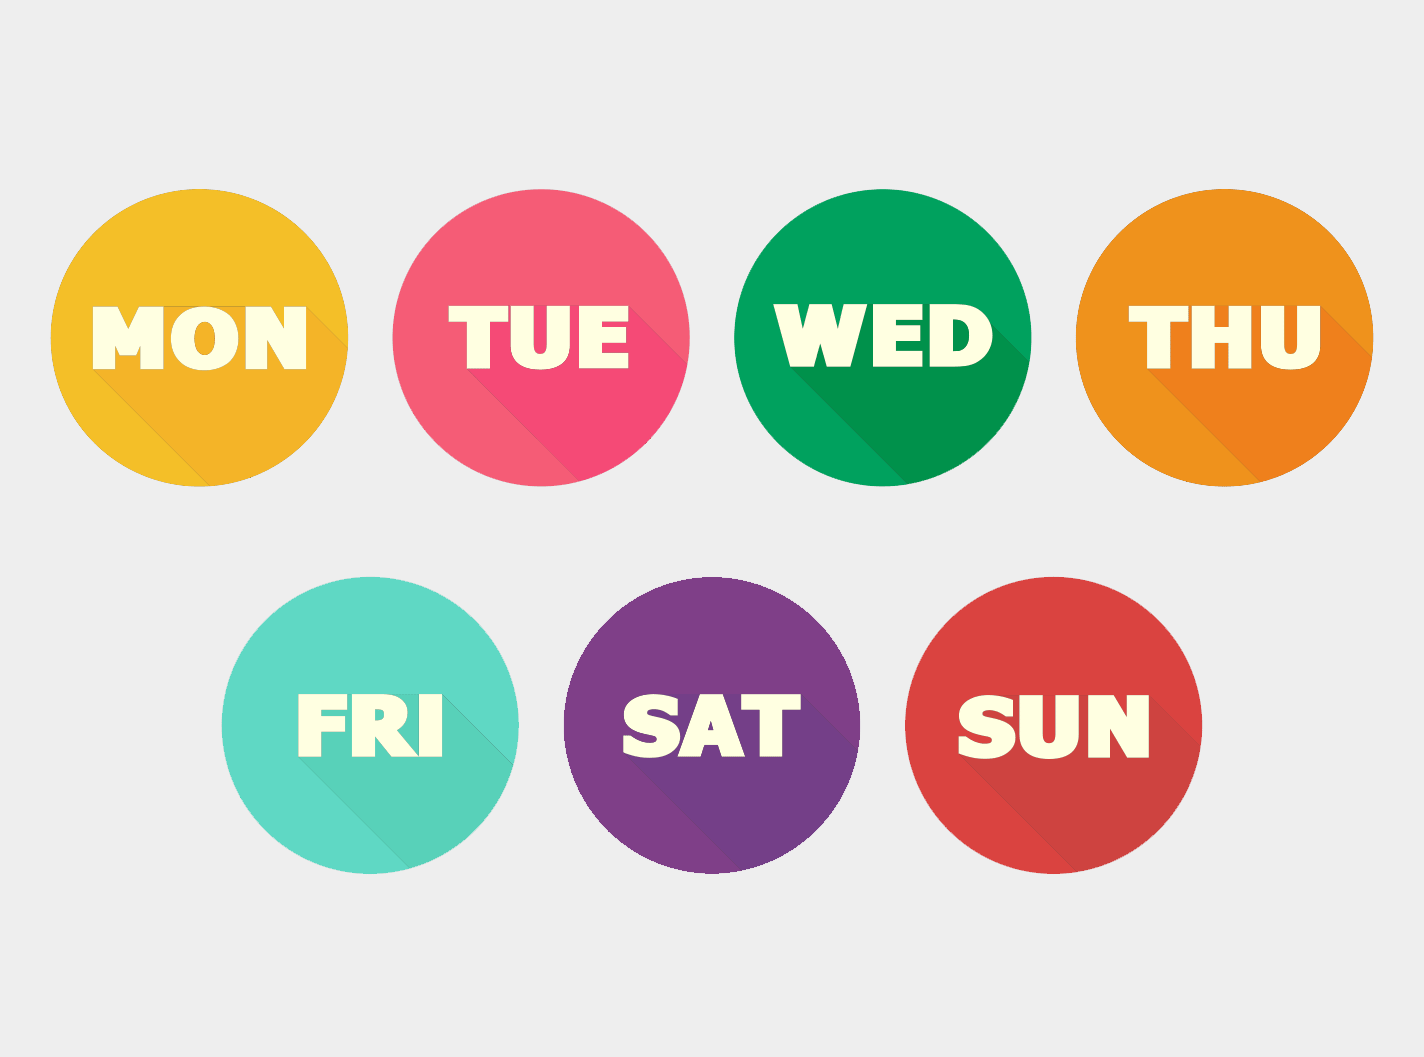 Days of the Week in Polish